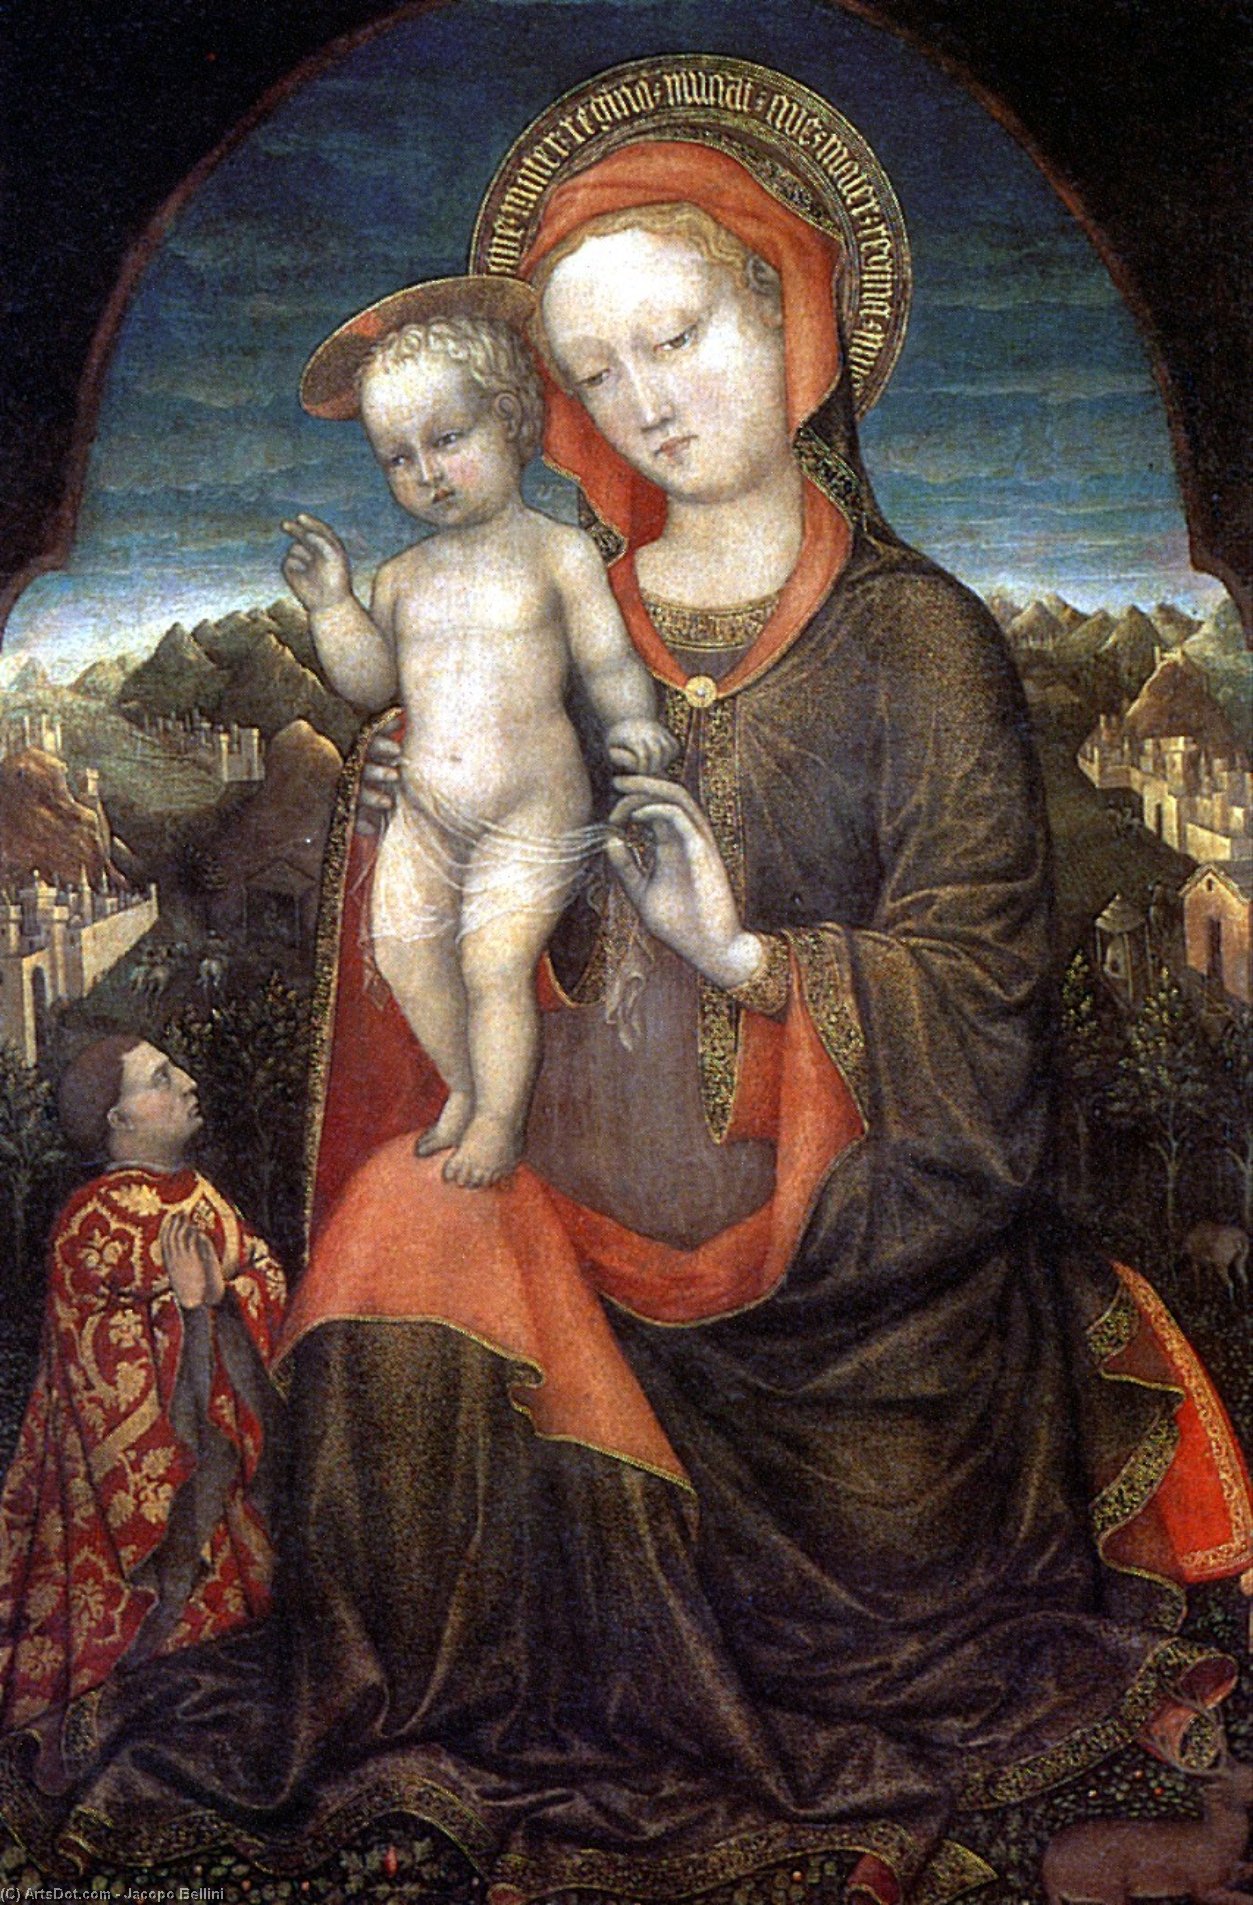 WikiOO.org - Encyclopedia of Fine Arts - Lukisan, Artwork Jacopo Bellini - The Madonna of Humility adored by Leonello d'Este